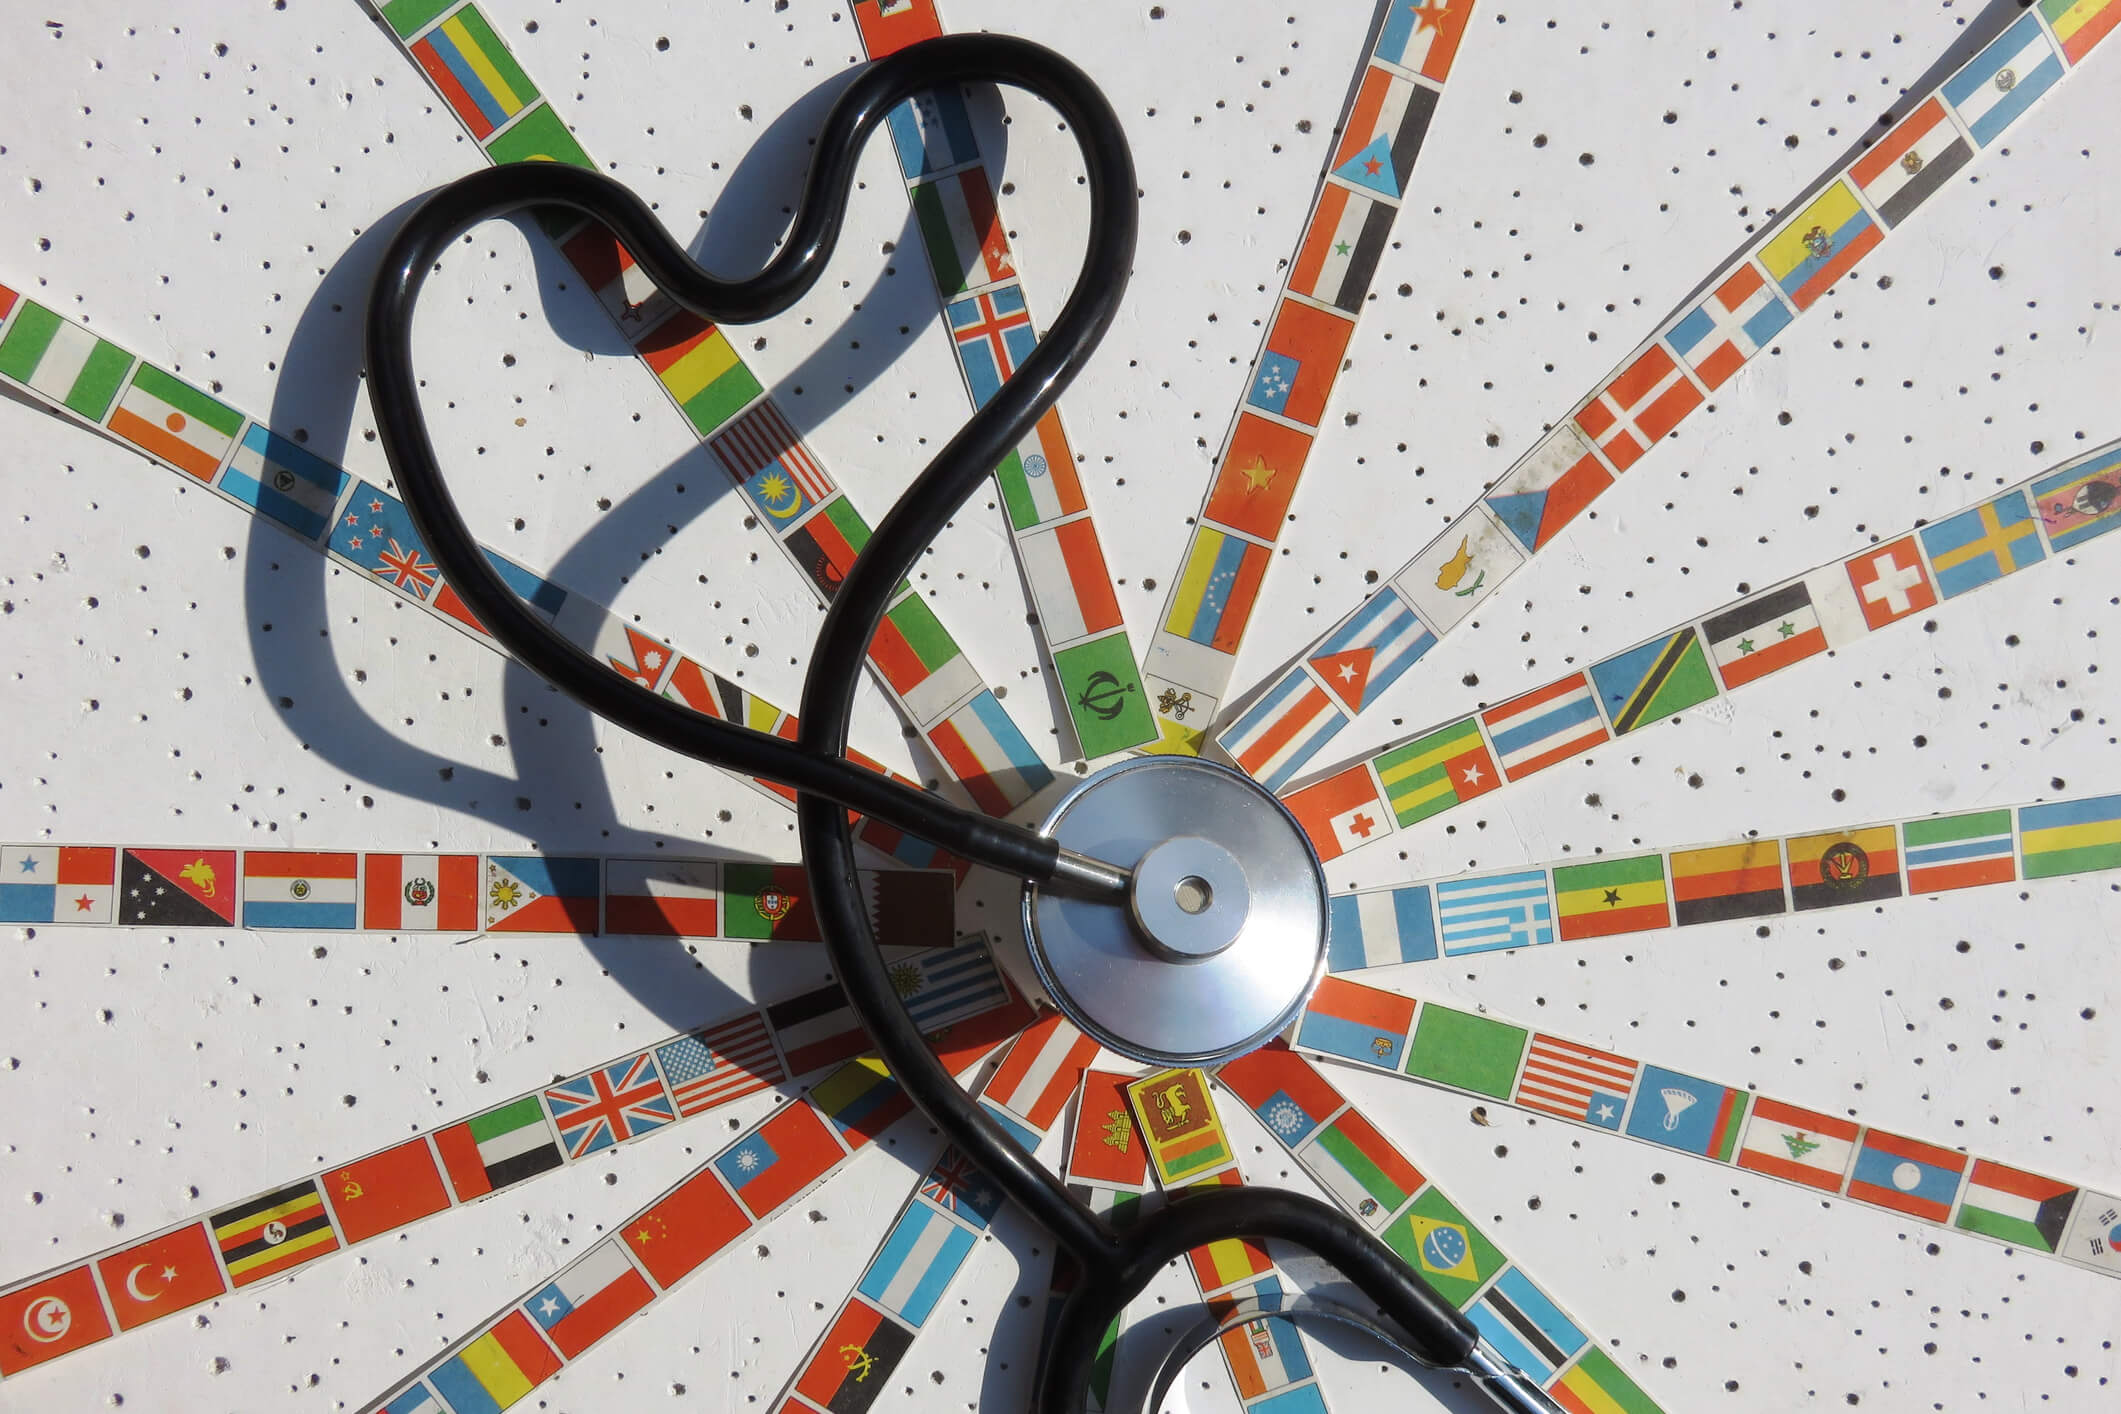 stethoscope in the middle of flags from around the world